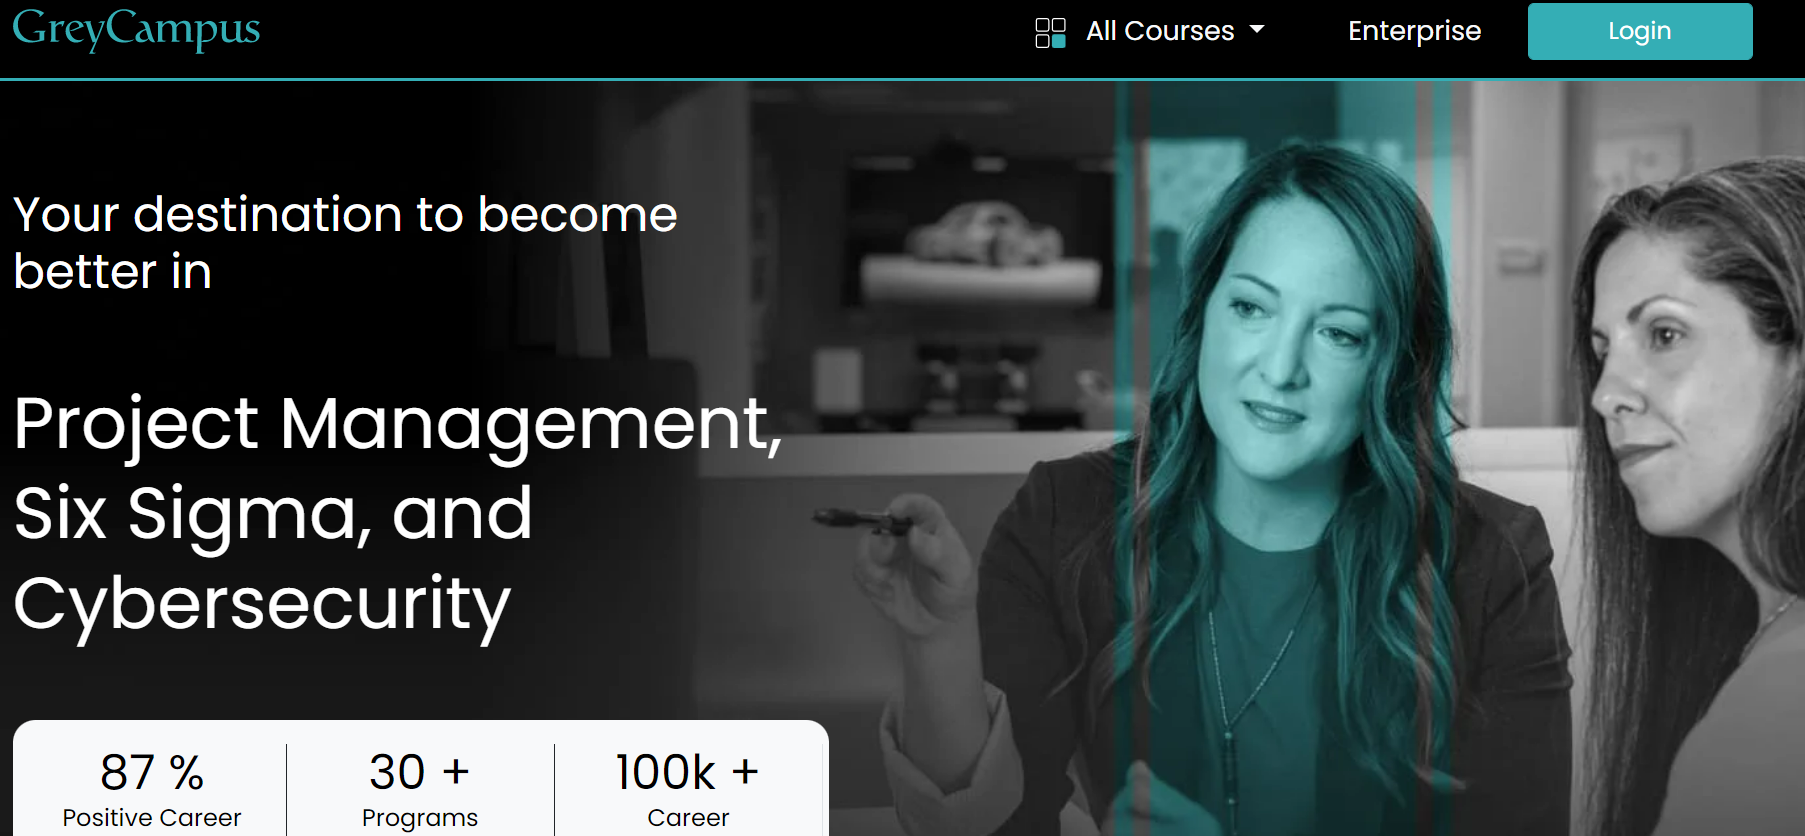 GreyCampus Review : An Online Professional Certifications Training Provider